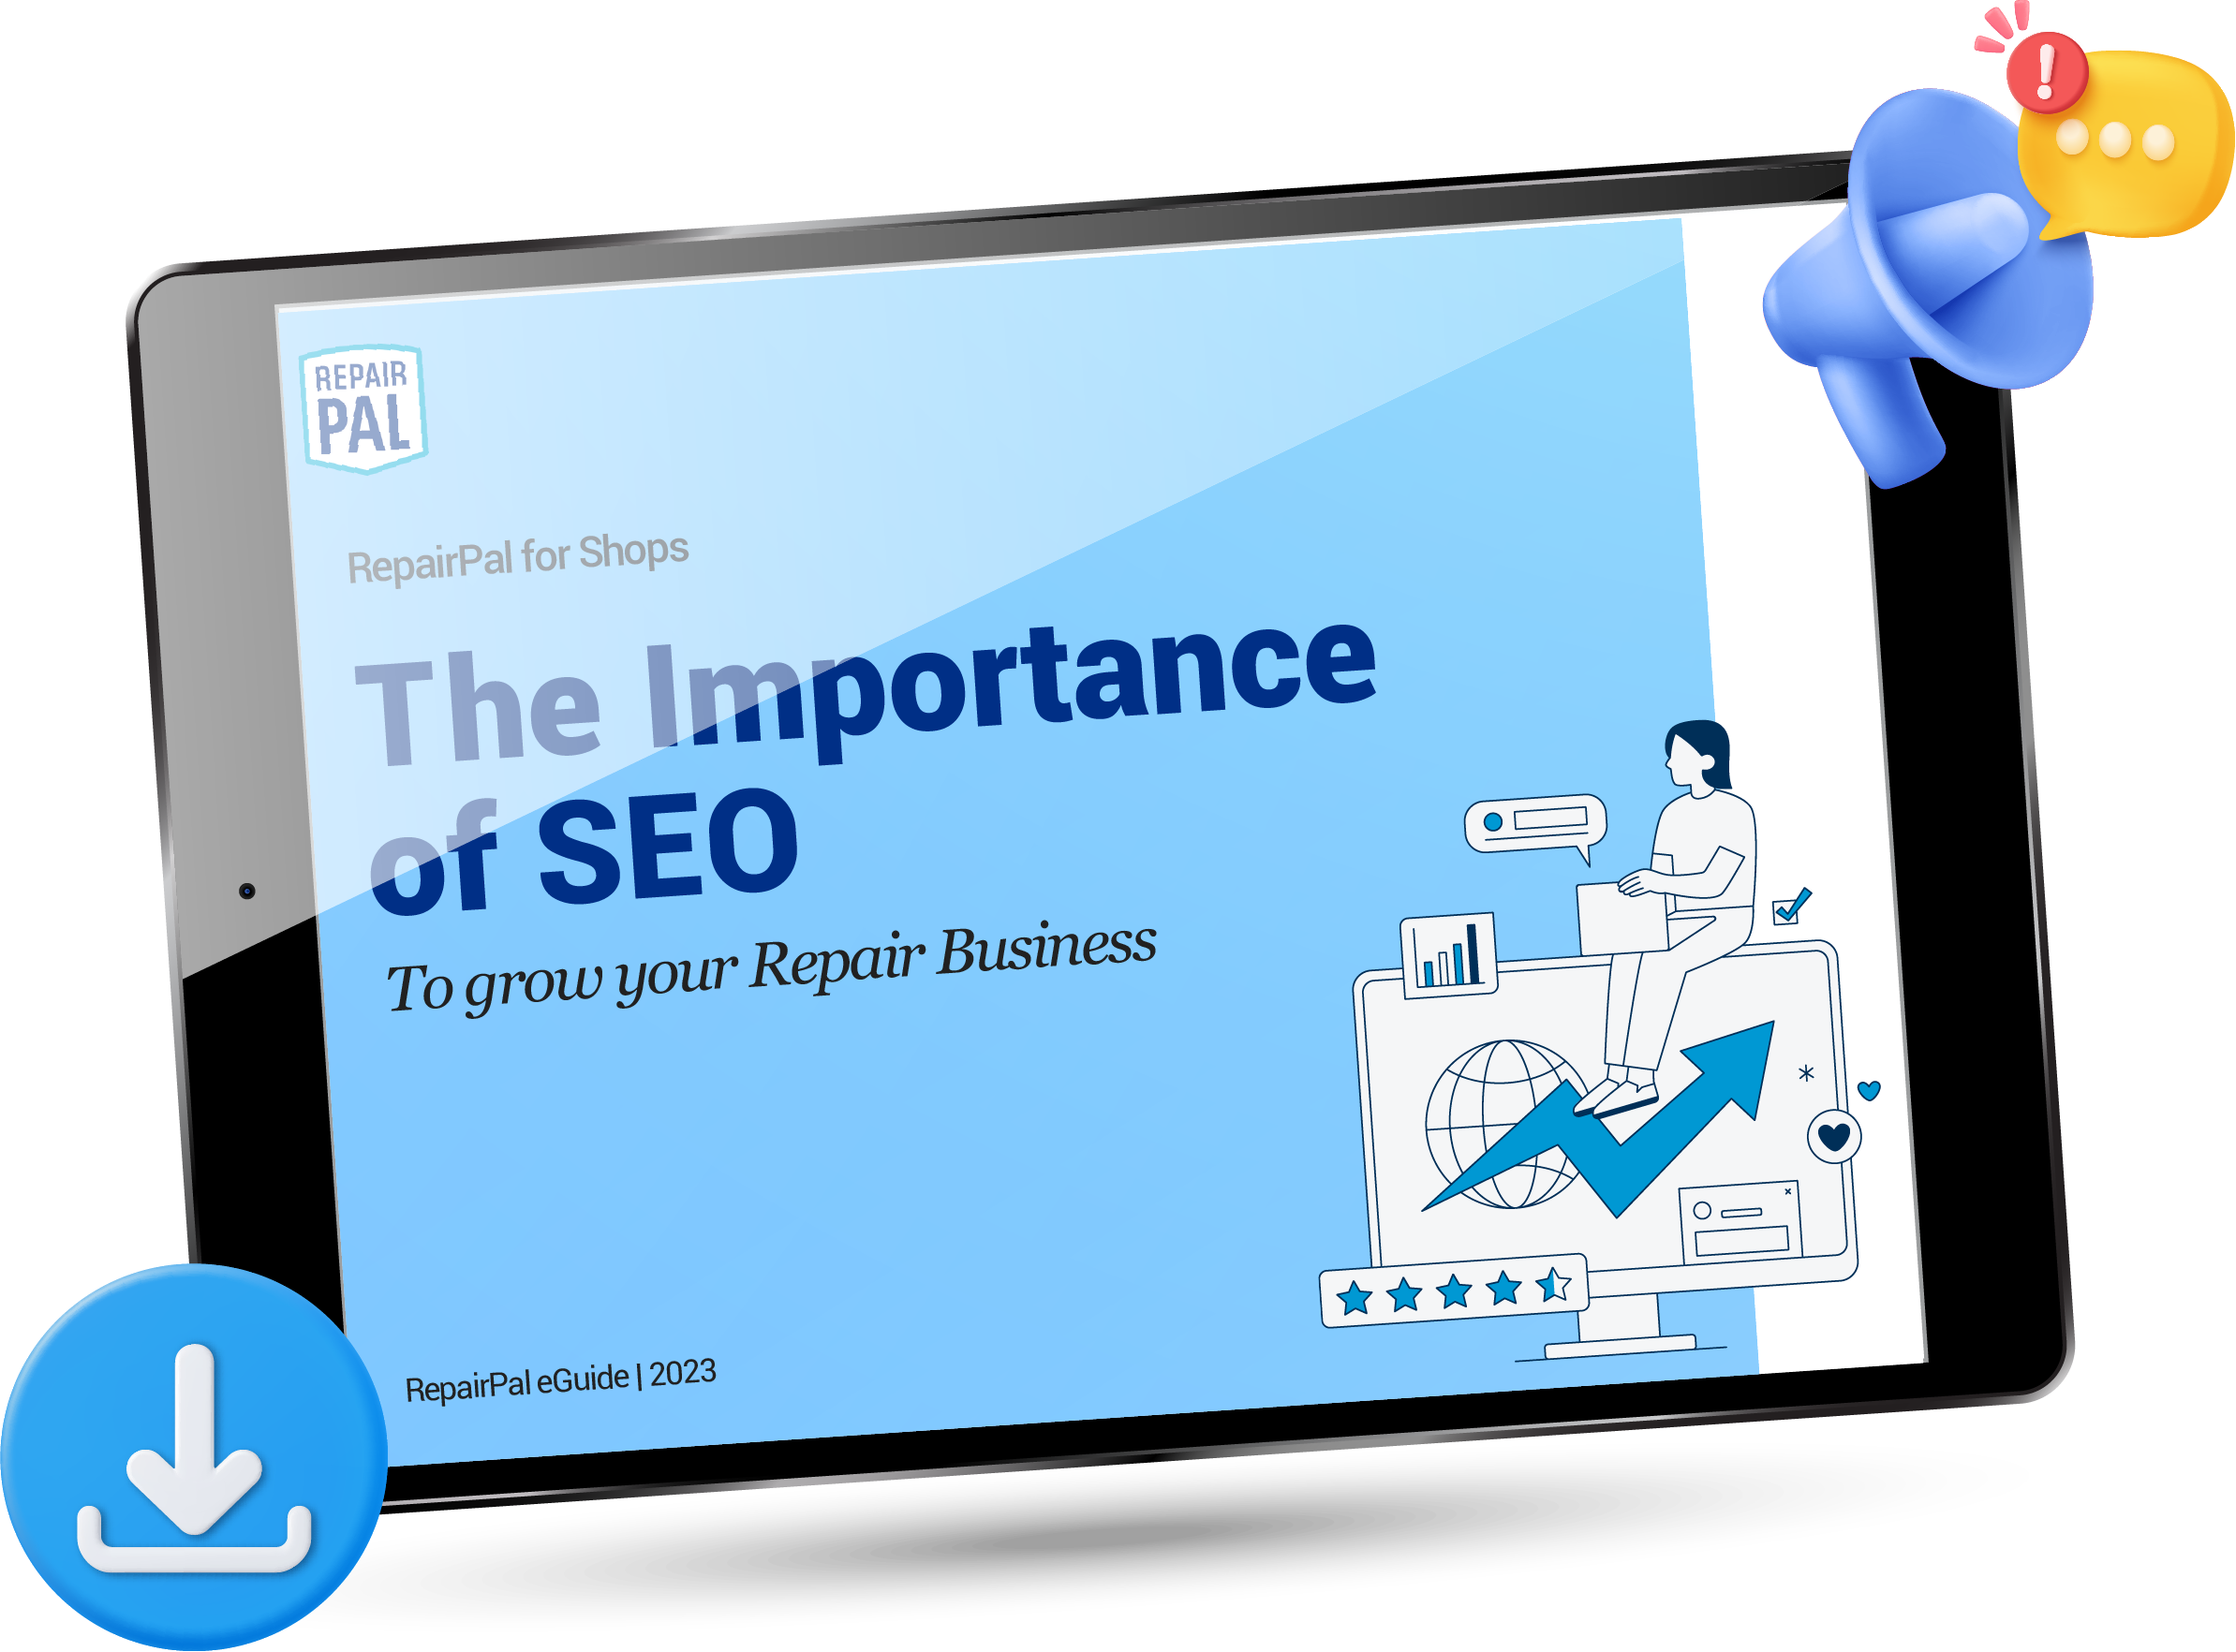 The Importance of SEO eguide